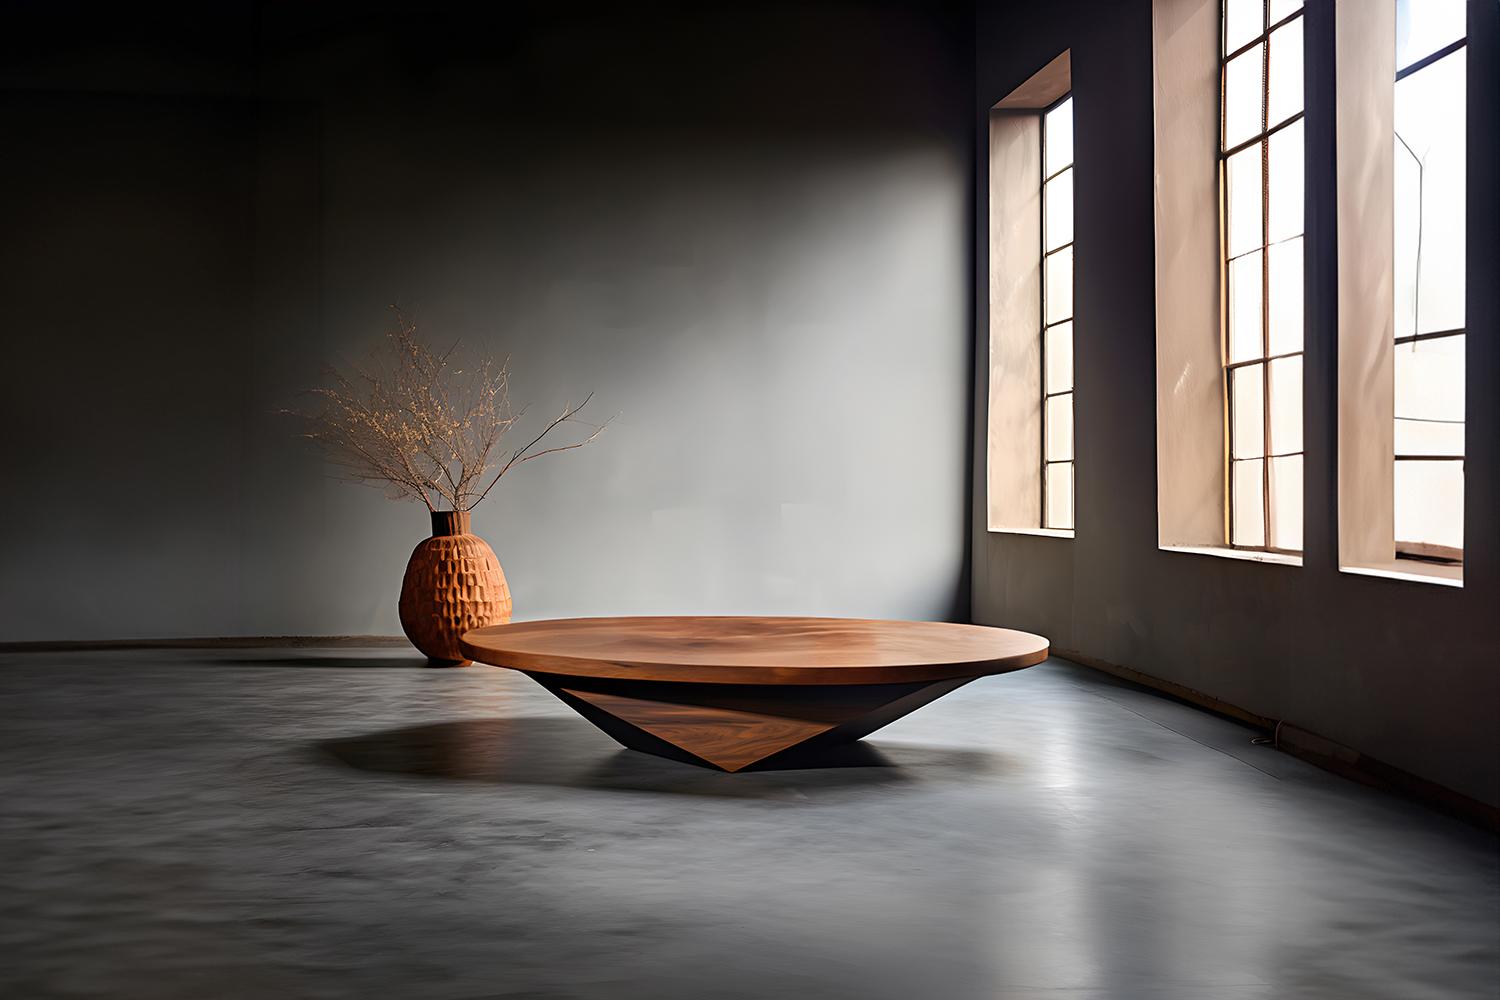 Oval Coffee Table Made of Solid Wood, Center Table Solace S21 by Joel Escalona


The Solace table series, designed by Joel Escalona, is a furniture collection that exudes balance and presence, thanks to its sensuous, dense, and irregular shapes.